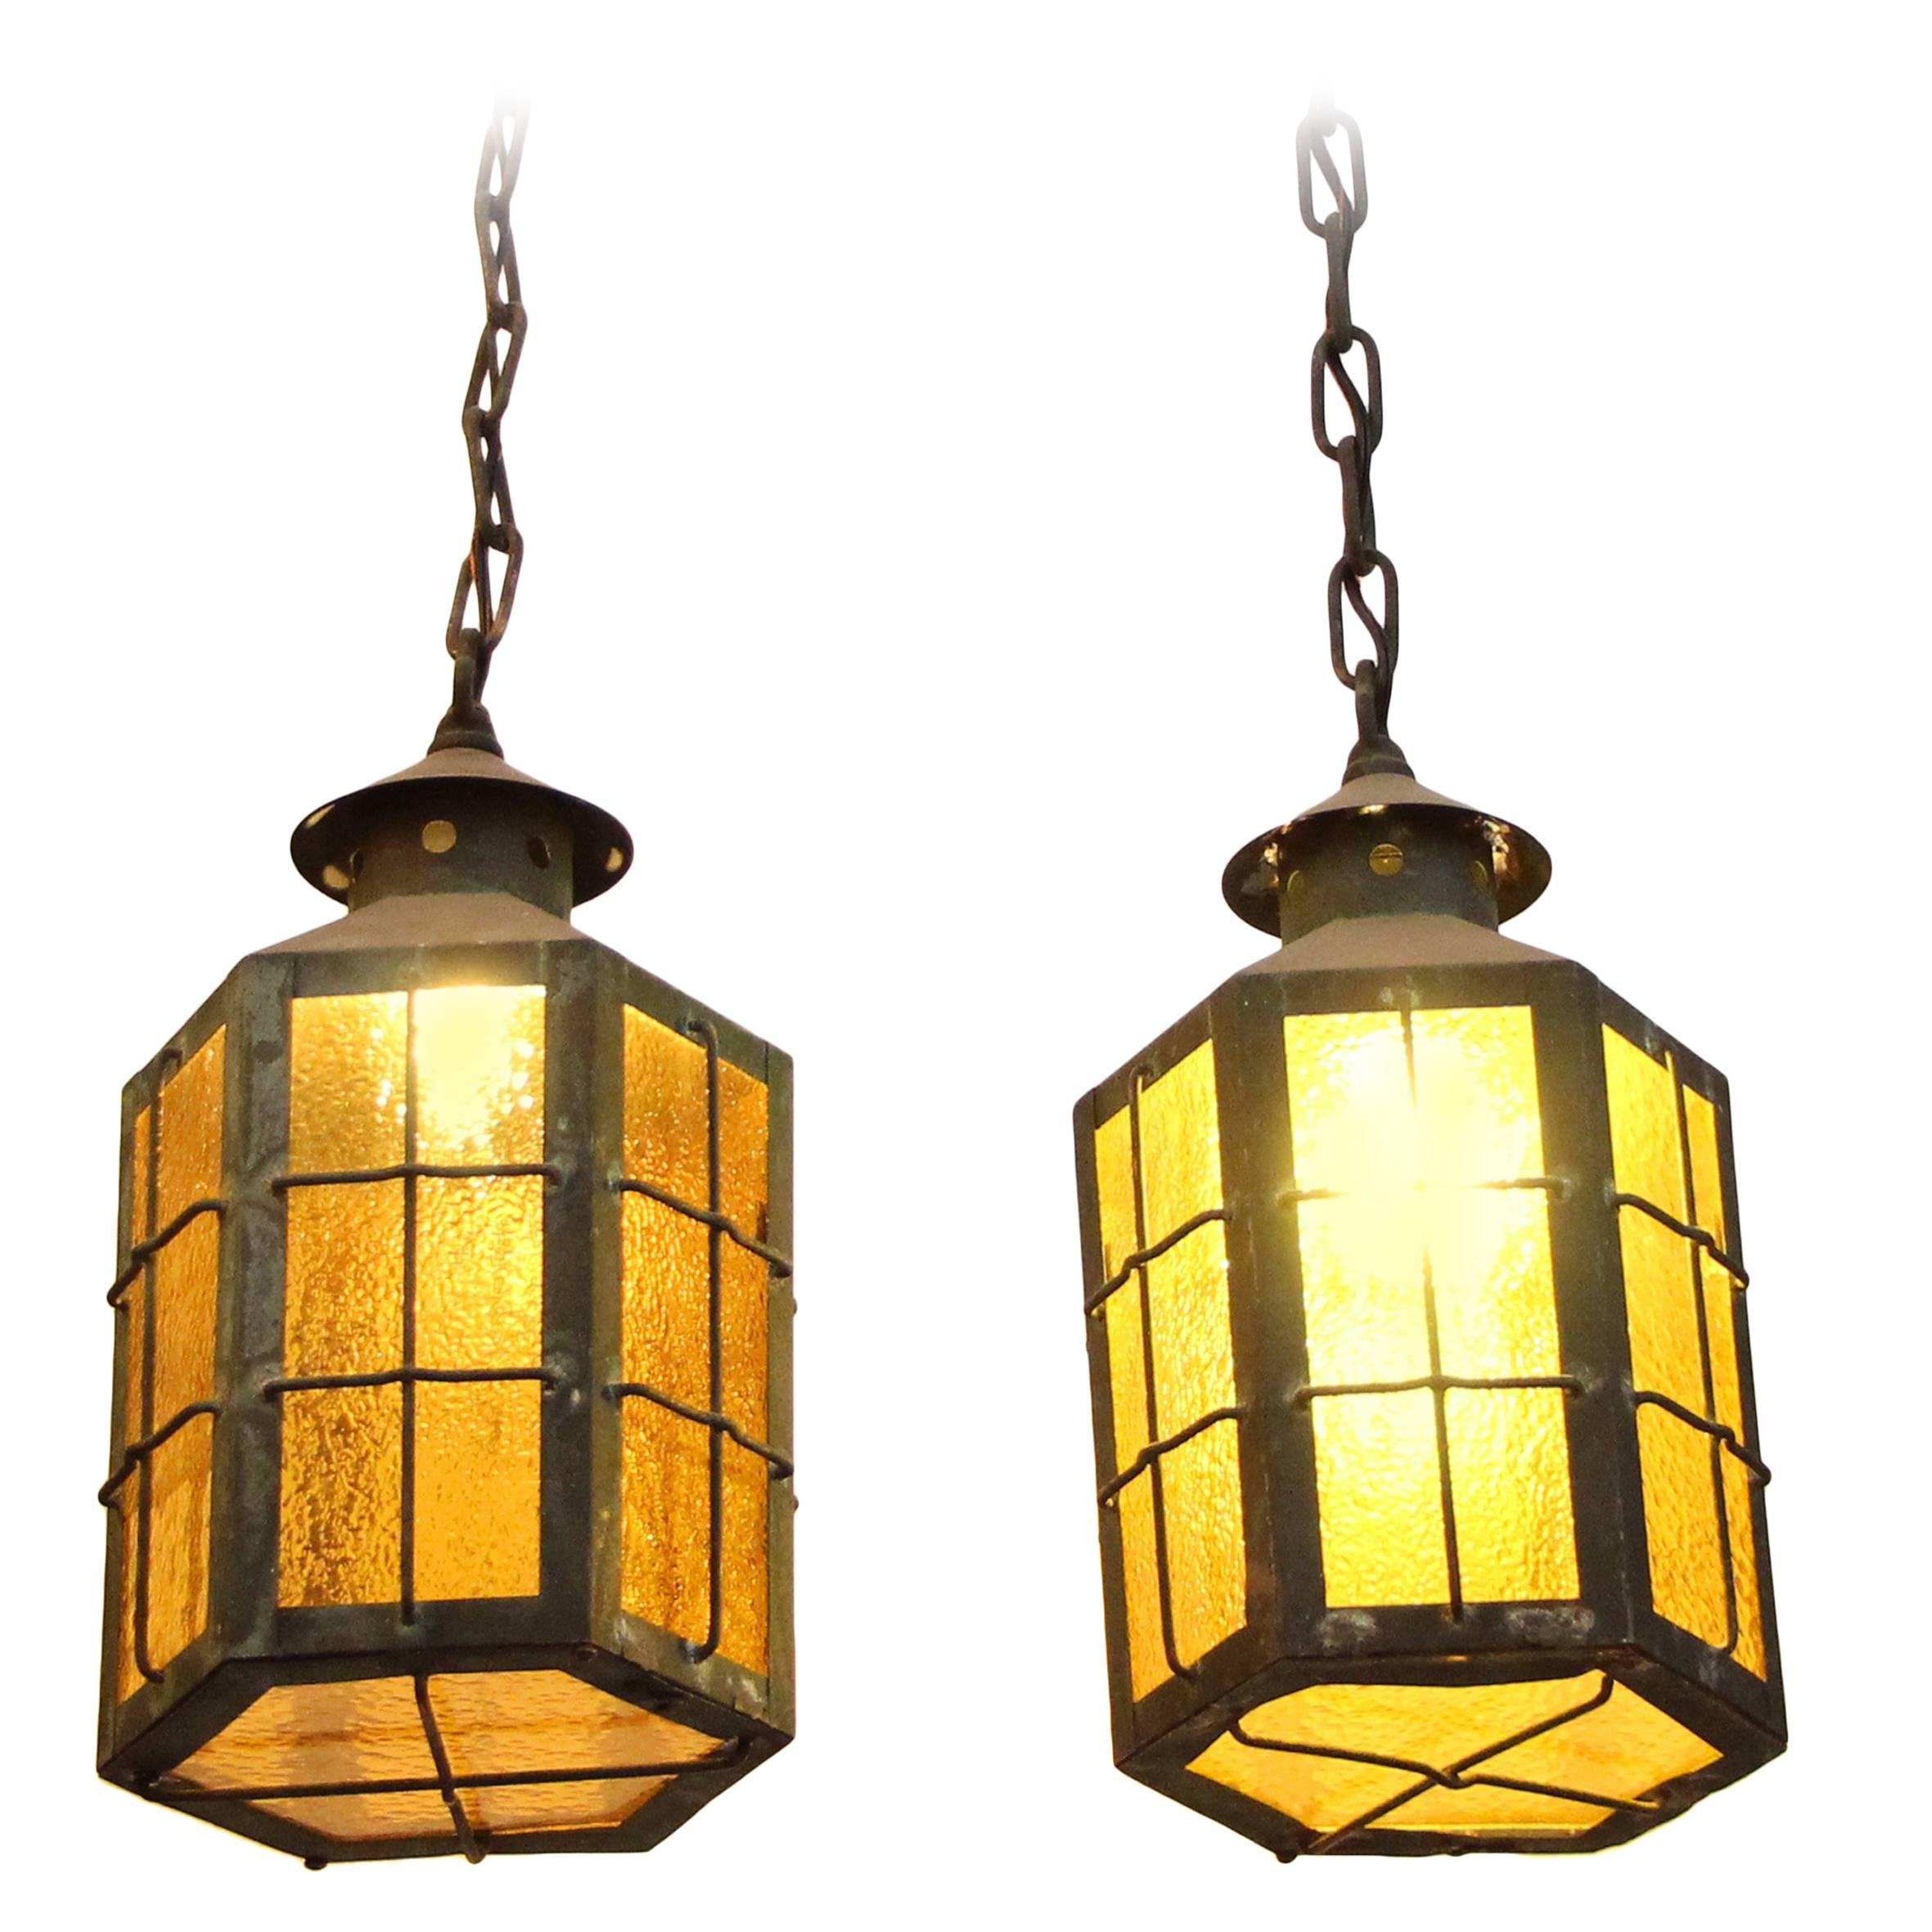 1930s Pair of Outdoor Copper Pendant Lanterns with Textured Amber Glass